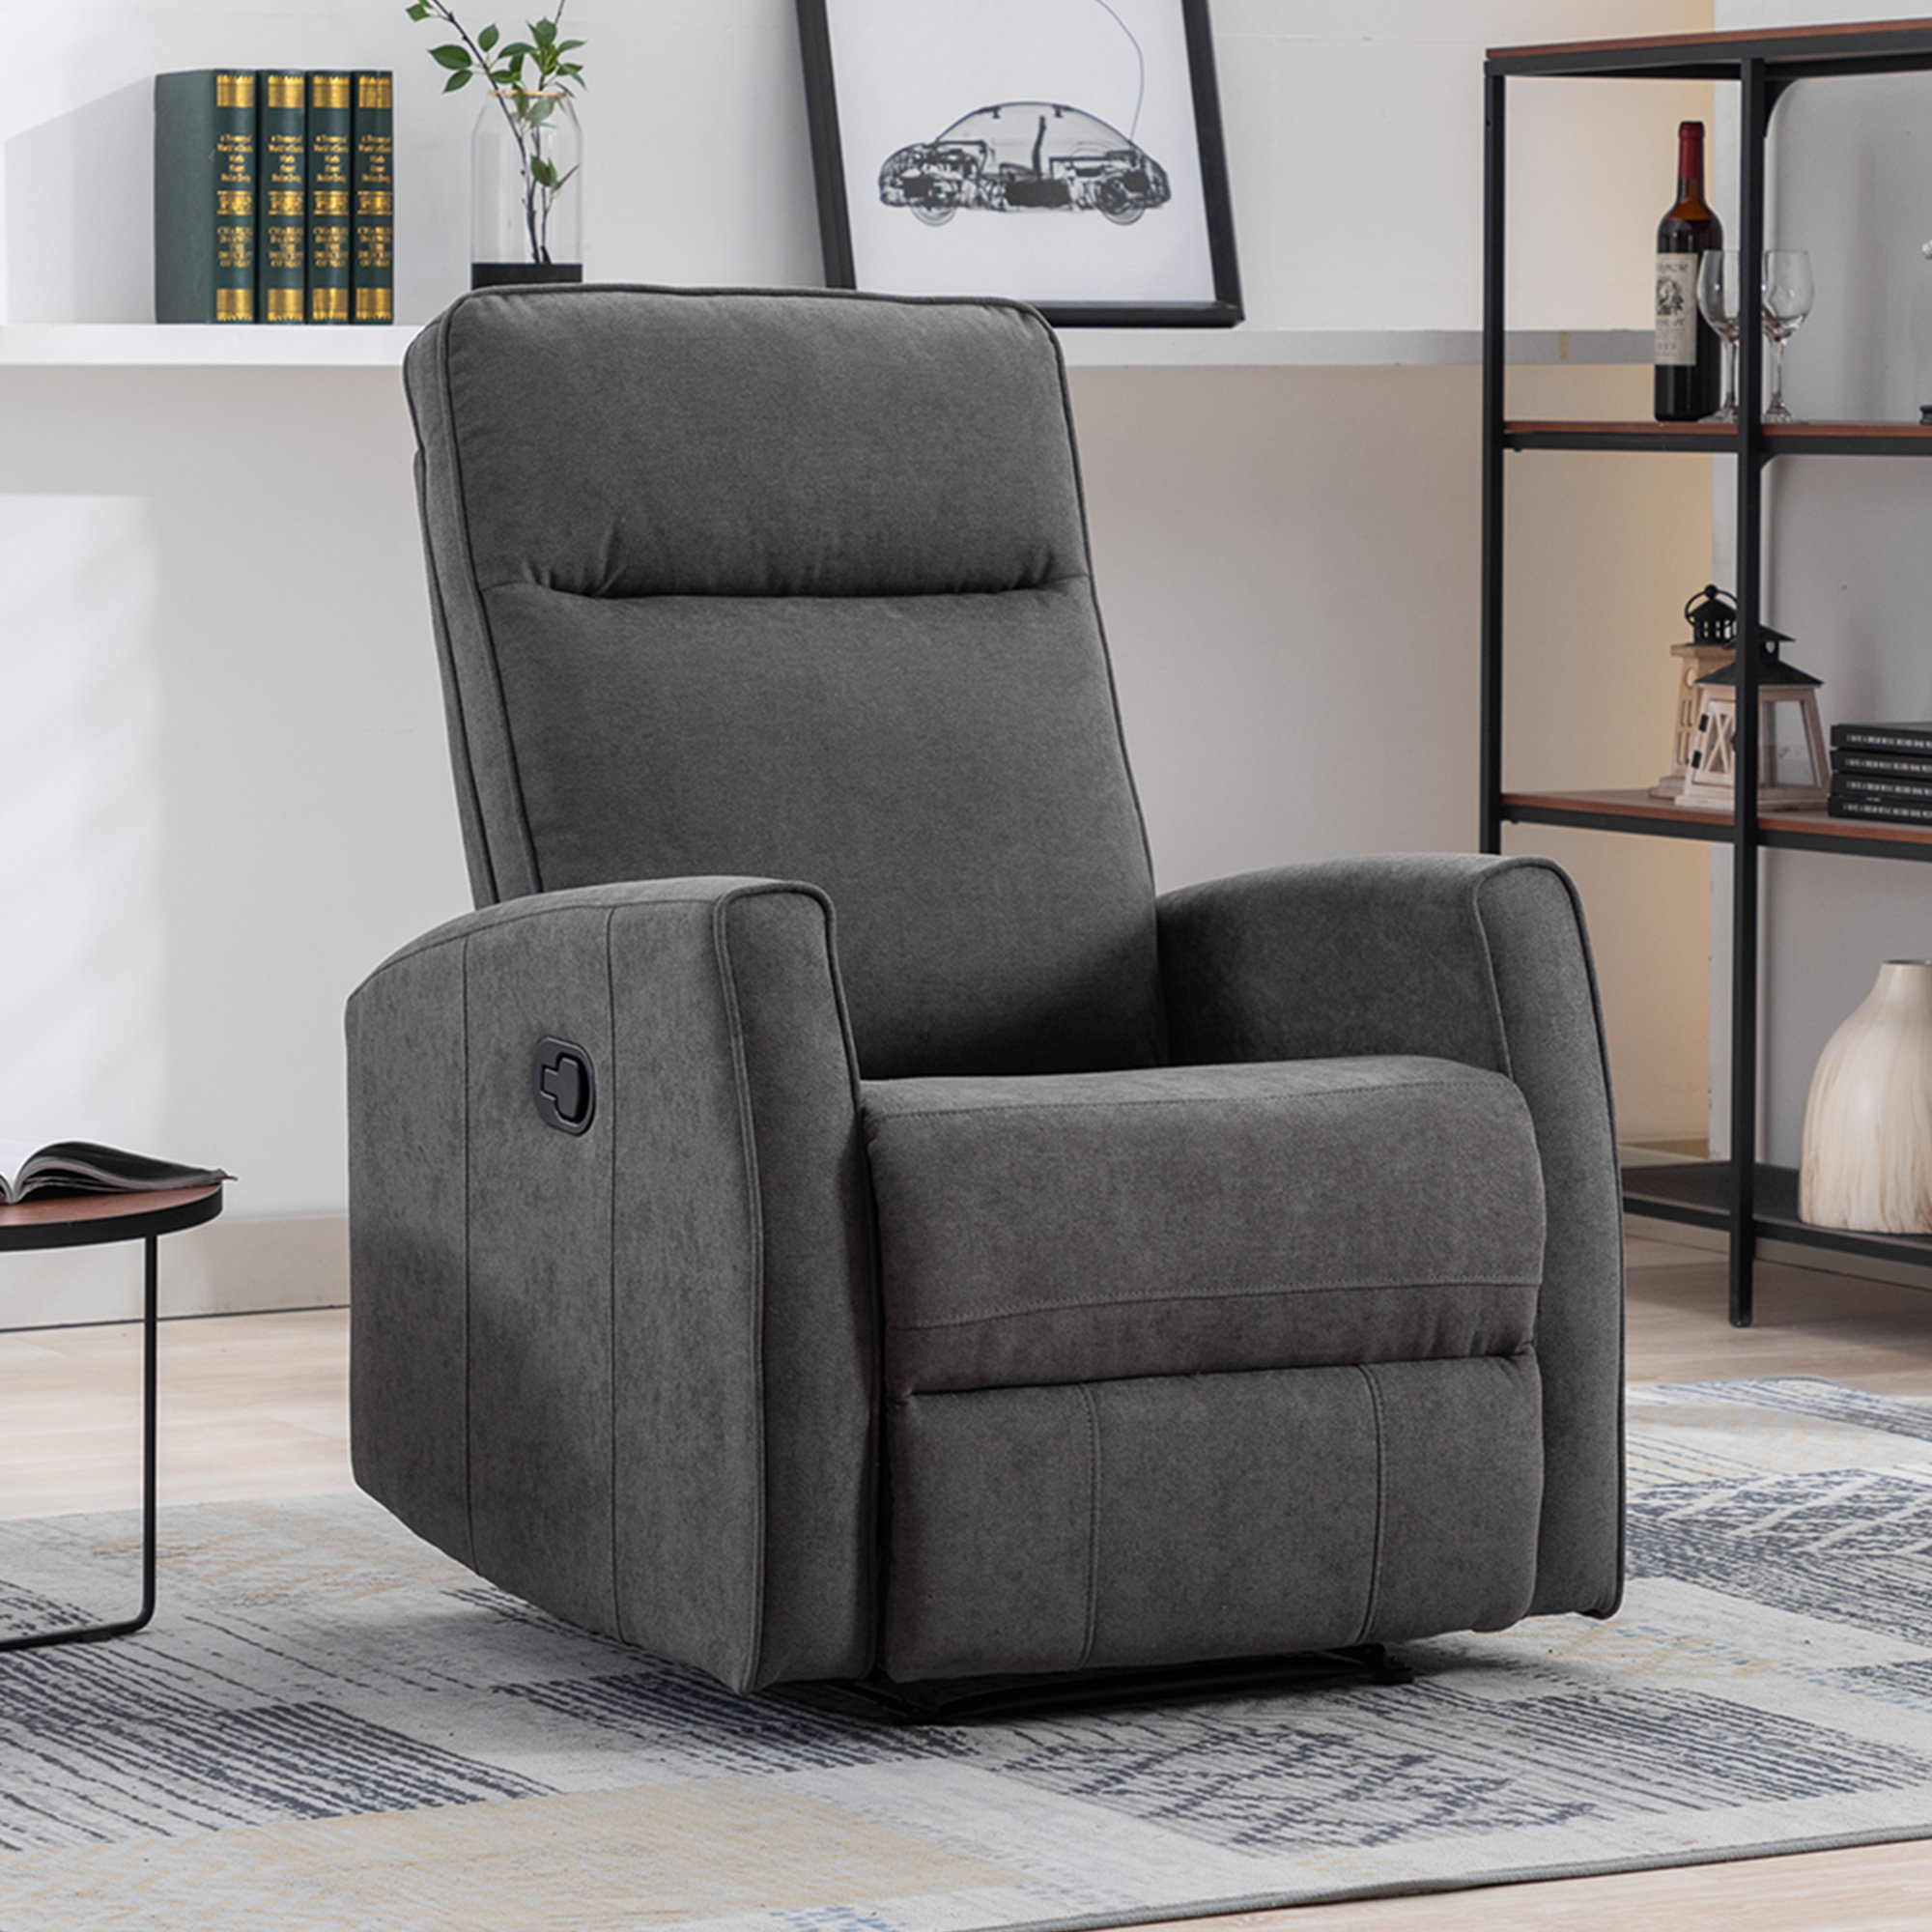 JST Recliner Chair for Living Room, Adjustable Modern Reclining Chair,  Recliner Sofa with Lumbar Support, Classic and Traditional Recliner Chair  with